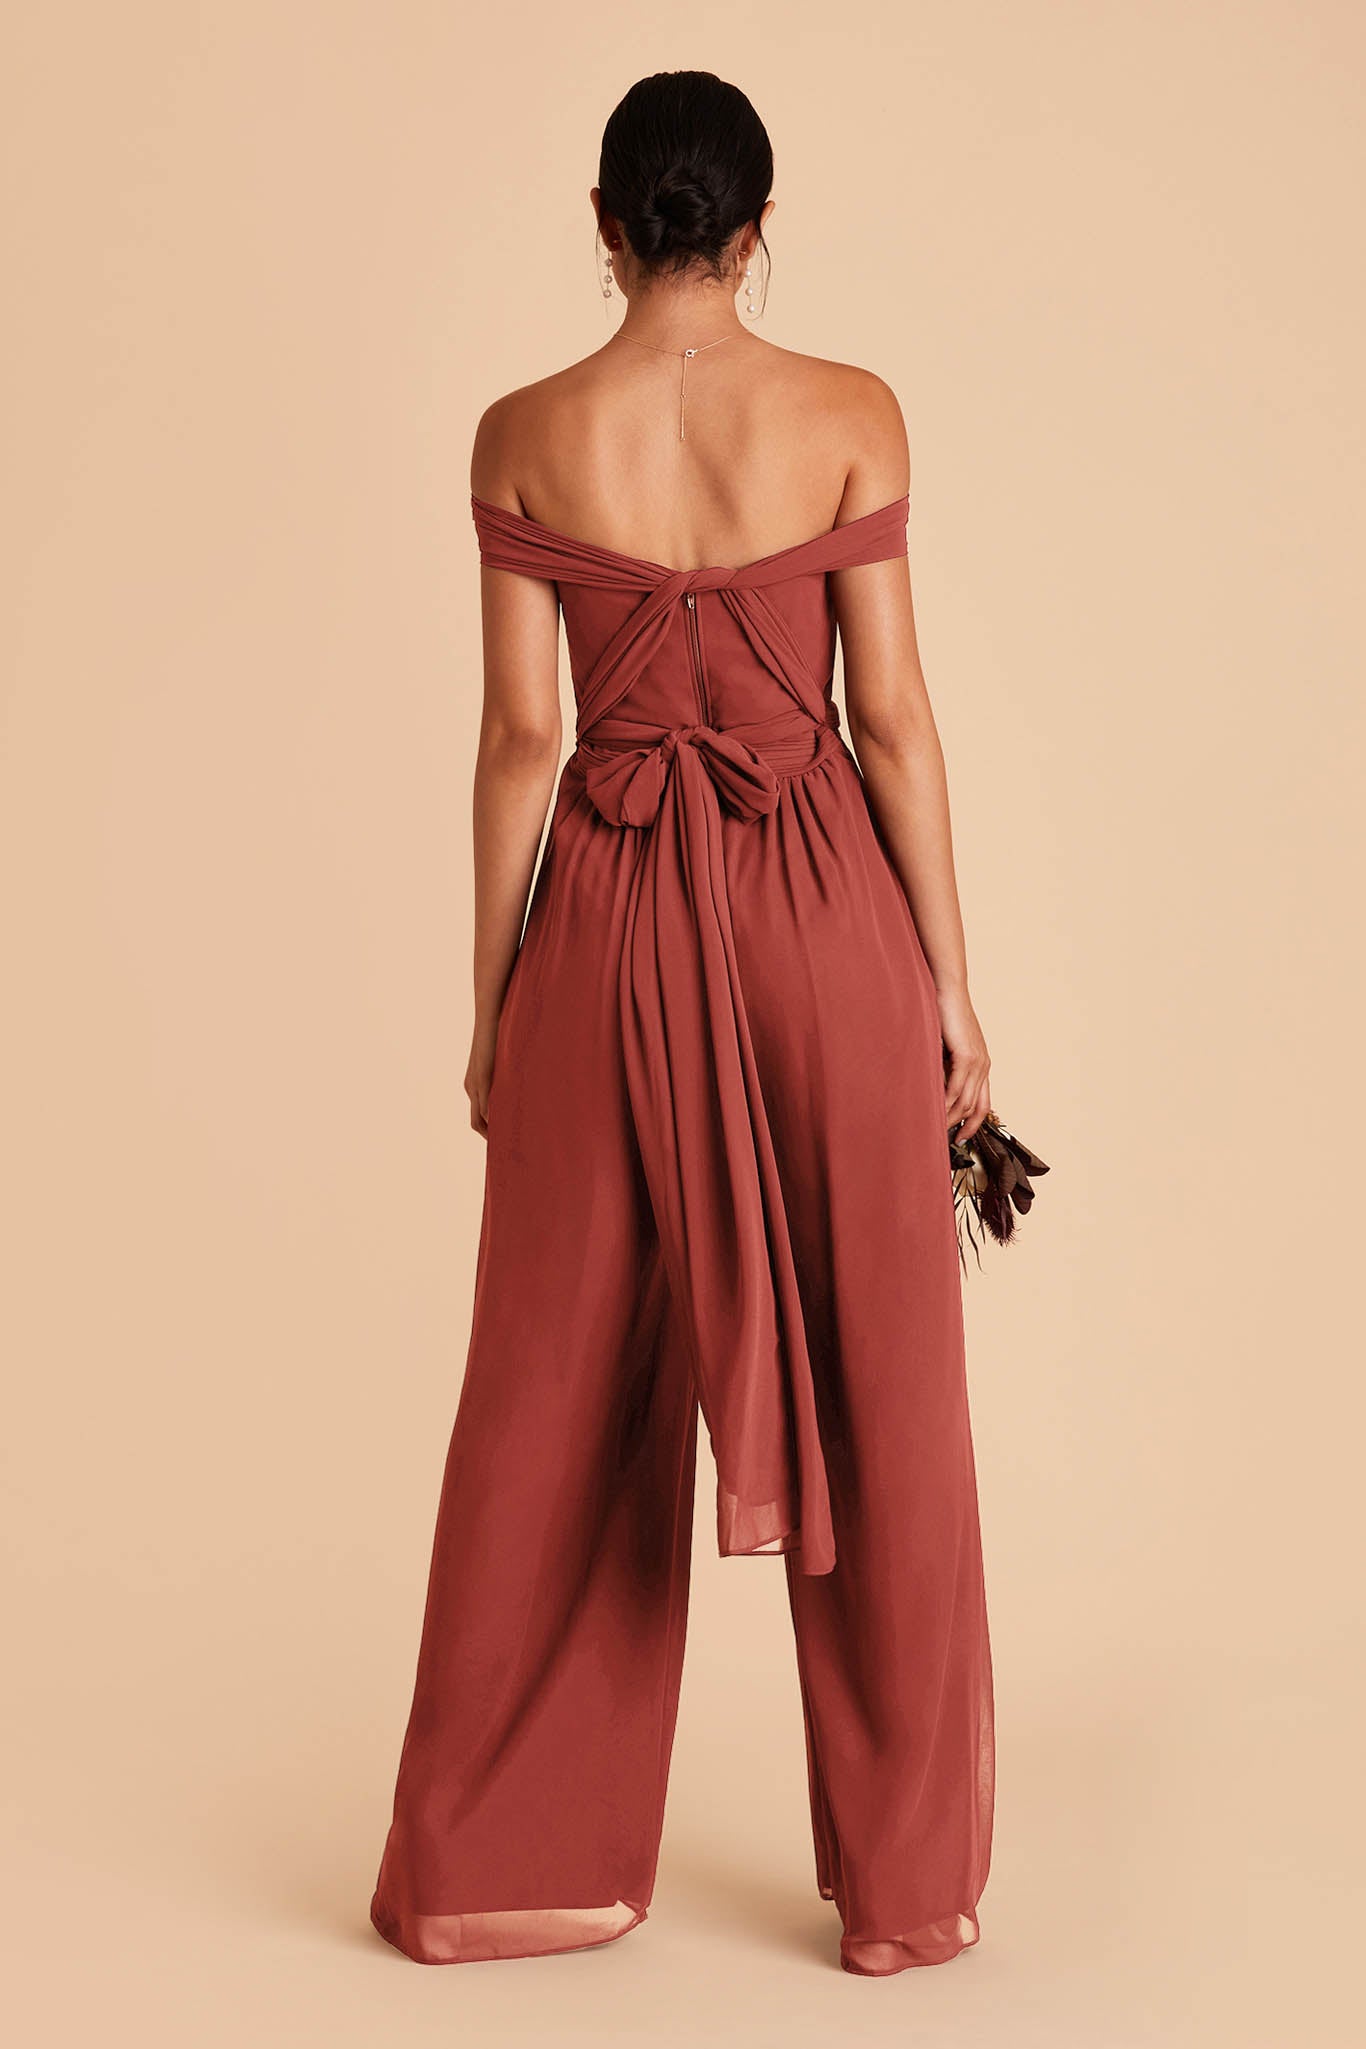 Reddish orange color wedding jumpsuit with with convertible neckline tie in the back